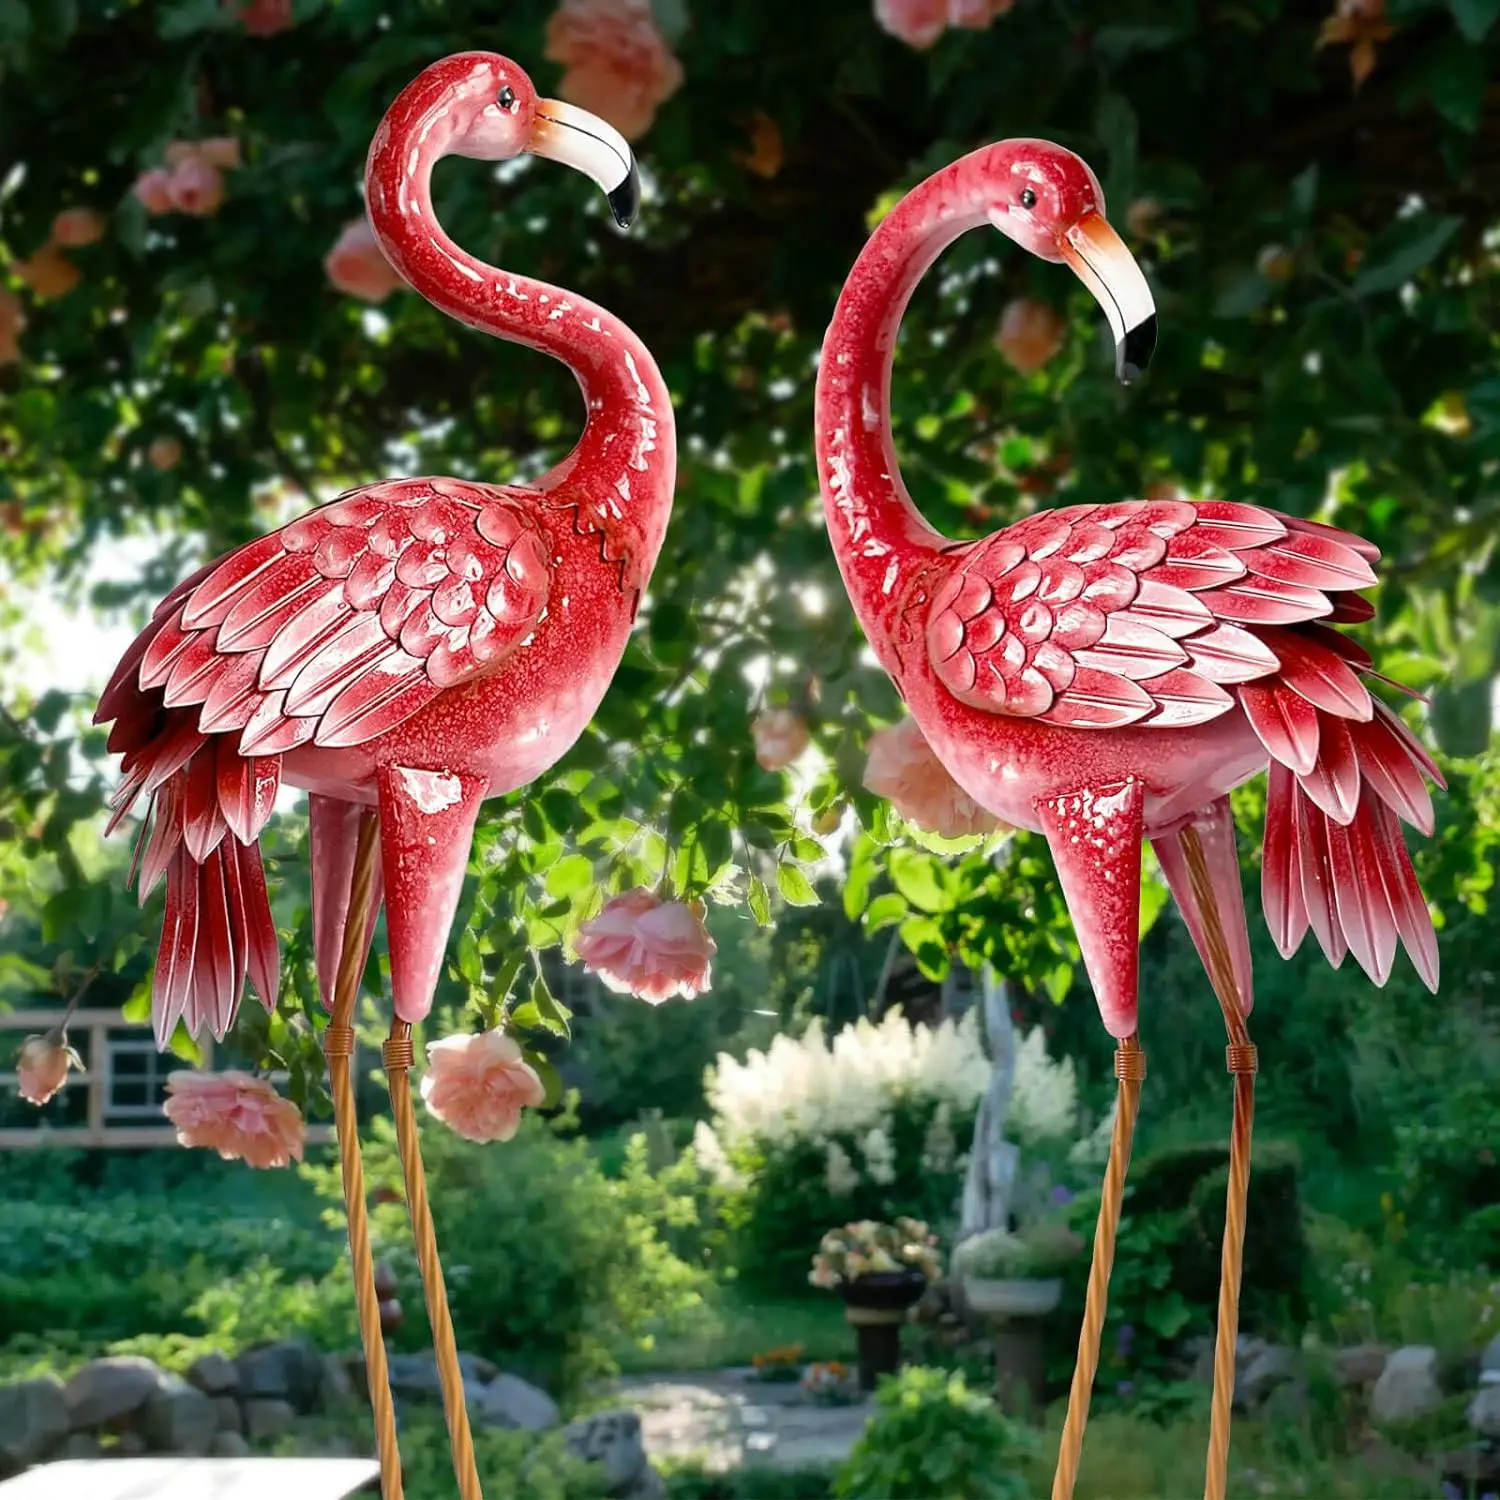 

Flamingo Garden Statues and Sculptures, Metal Birds Yard Art Outdoor Statue, Large Pink Flamingo Lawn Ornaments for Home,Patio